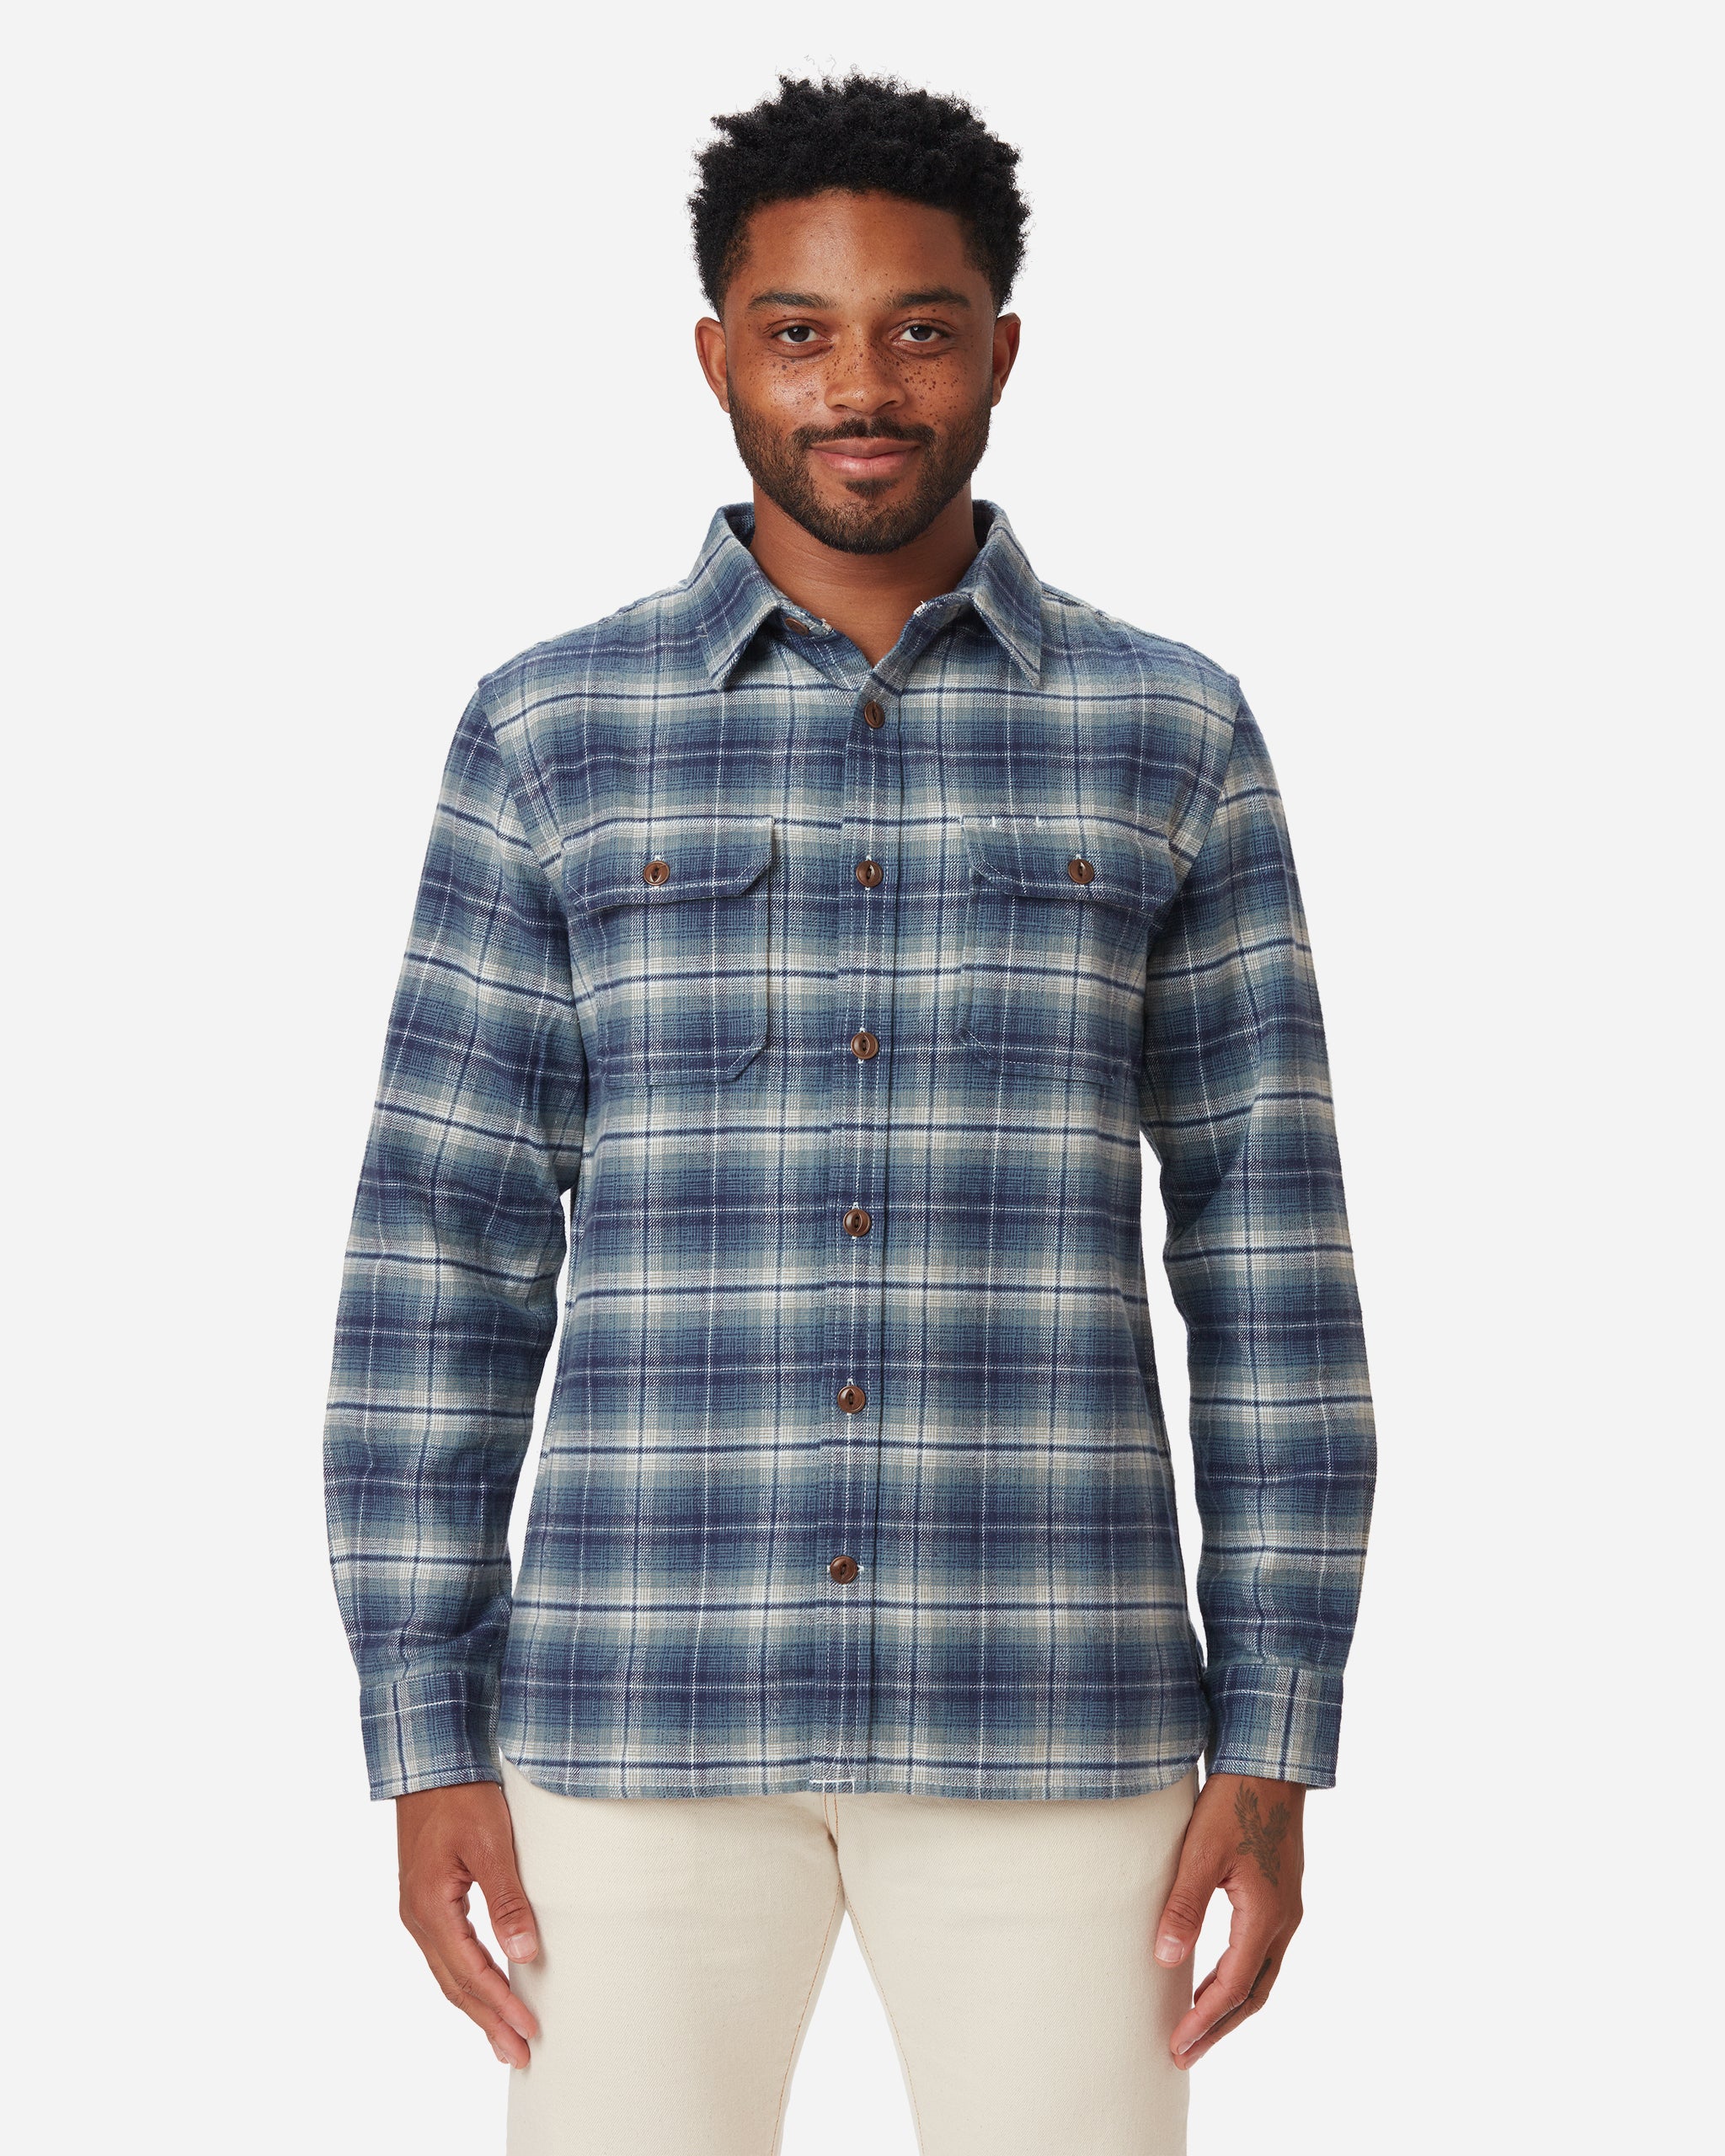 Model facing directly forward wearing men's off white and light blue plaid pattern flannel with brown buttons and white collar stripe and Ace Rivington Ecru colored denim jeans